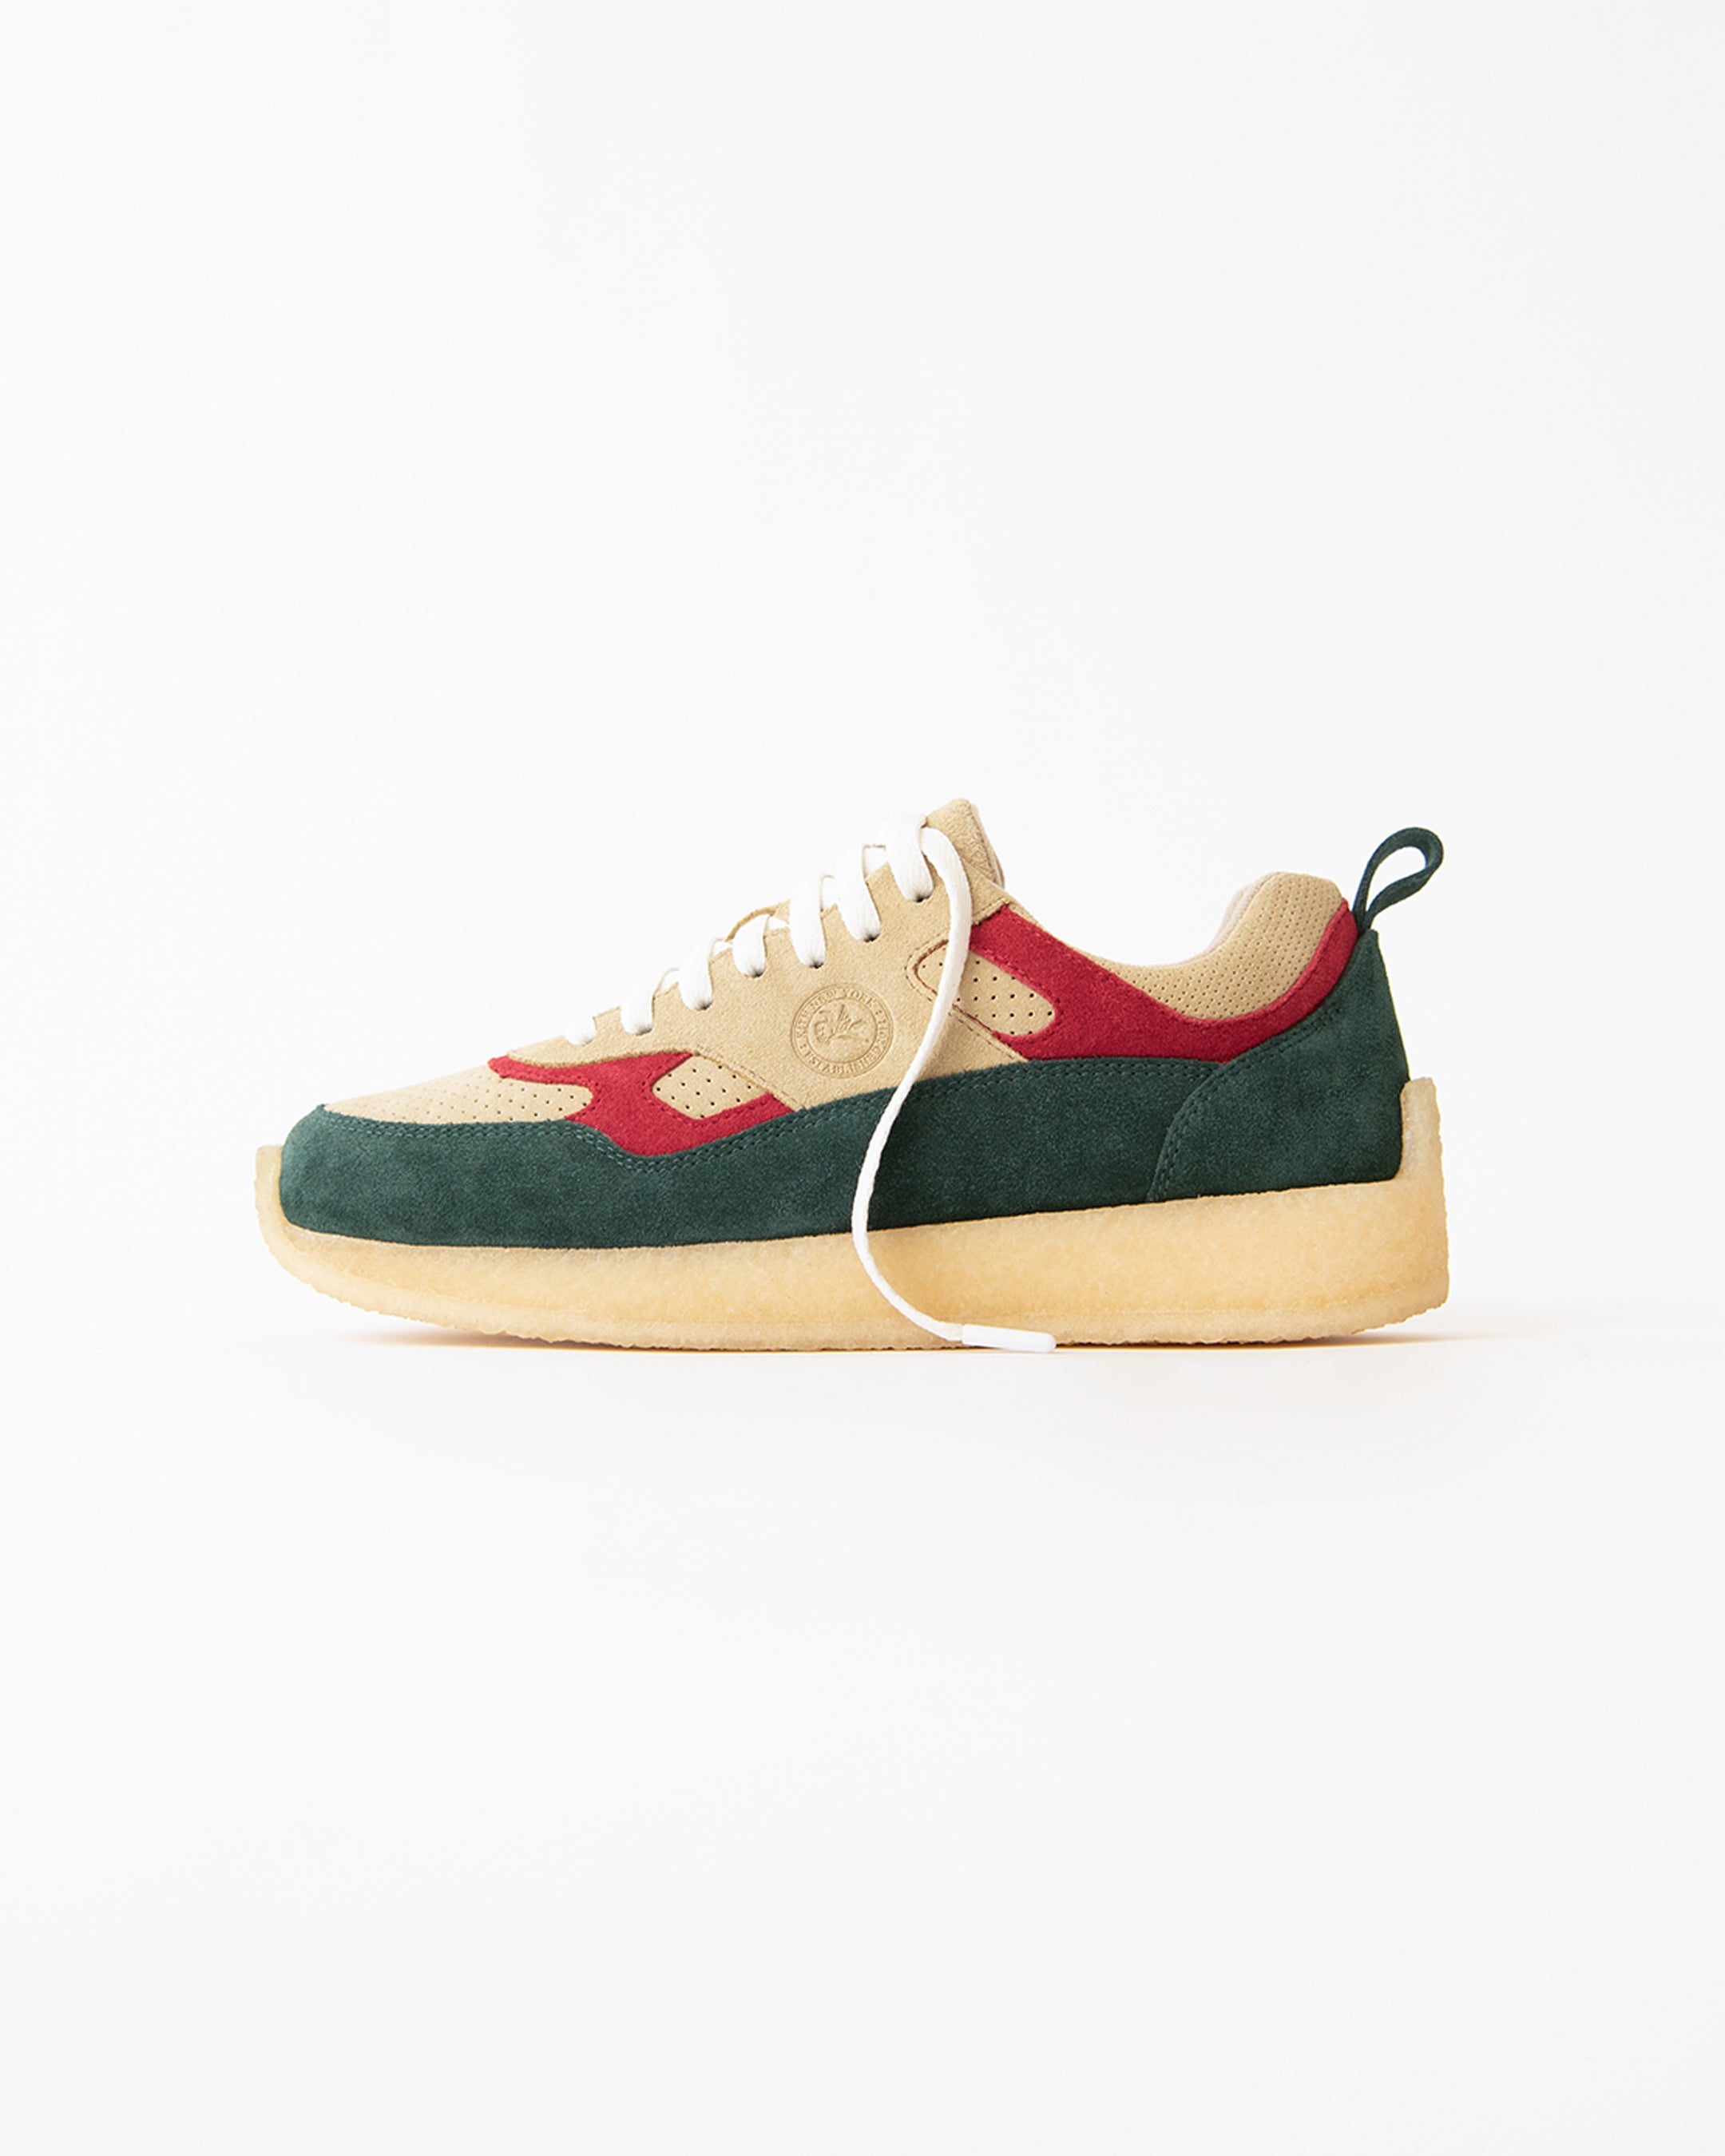 8th St by Ronnie Fieg for Clarks Originals – Kith Tokyo